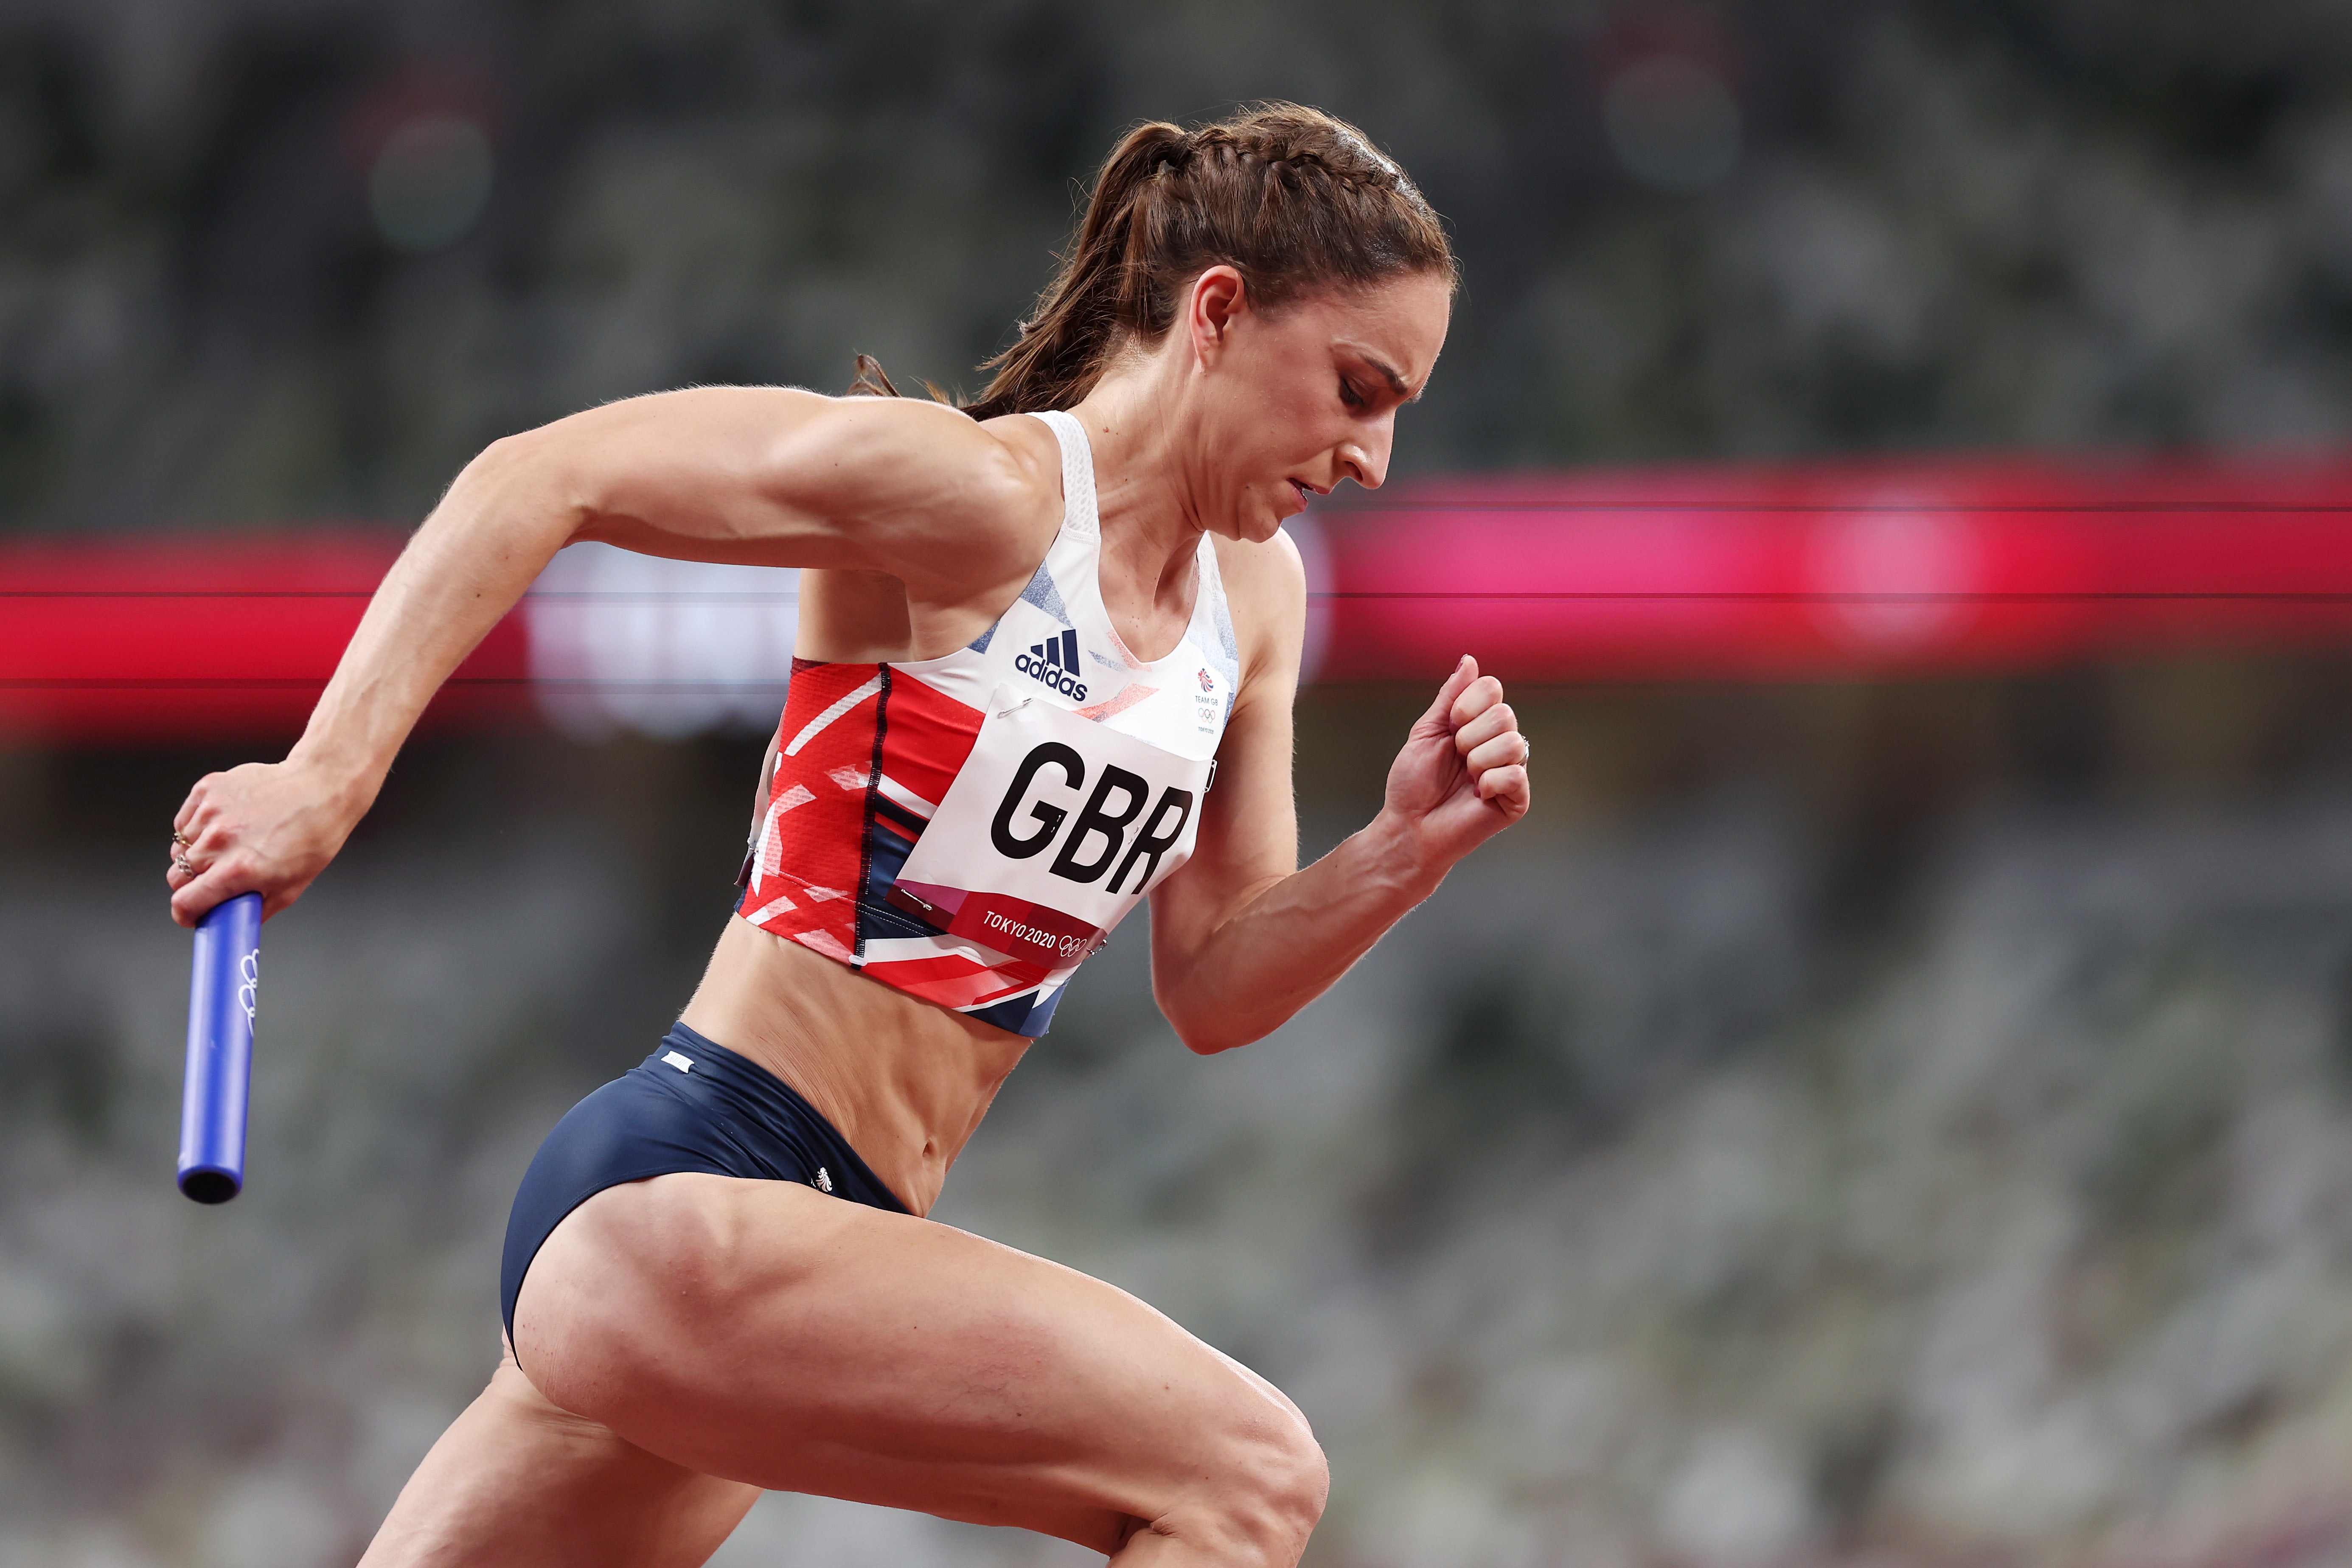 Team GB runner Emily Diamond has voiced her support of the decision